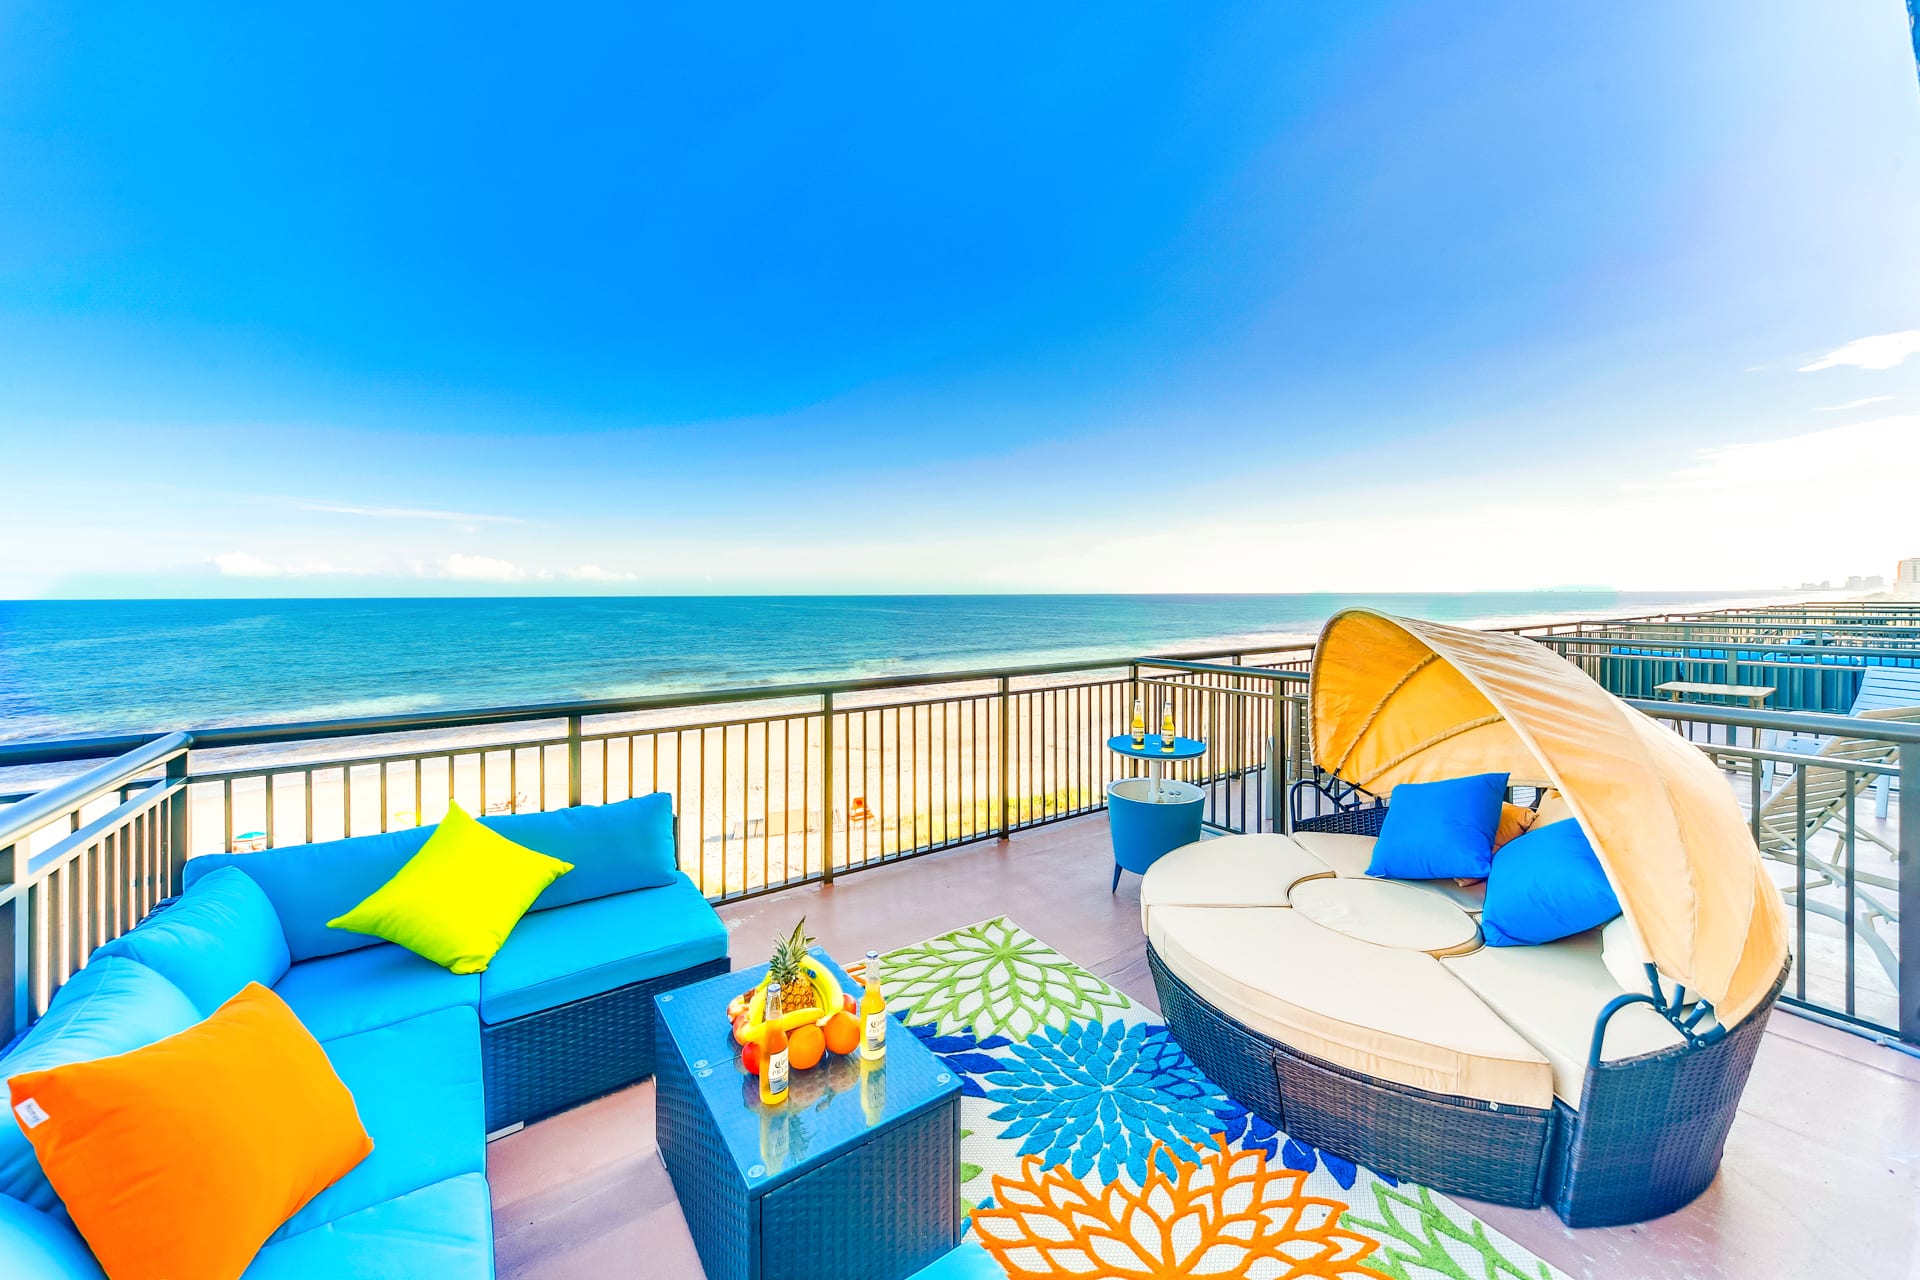 Oceanfront Condo Rentals a division of Beachfront Vacation Rentals